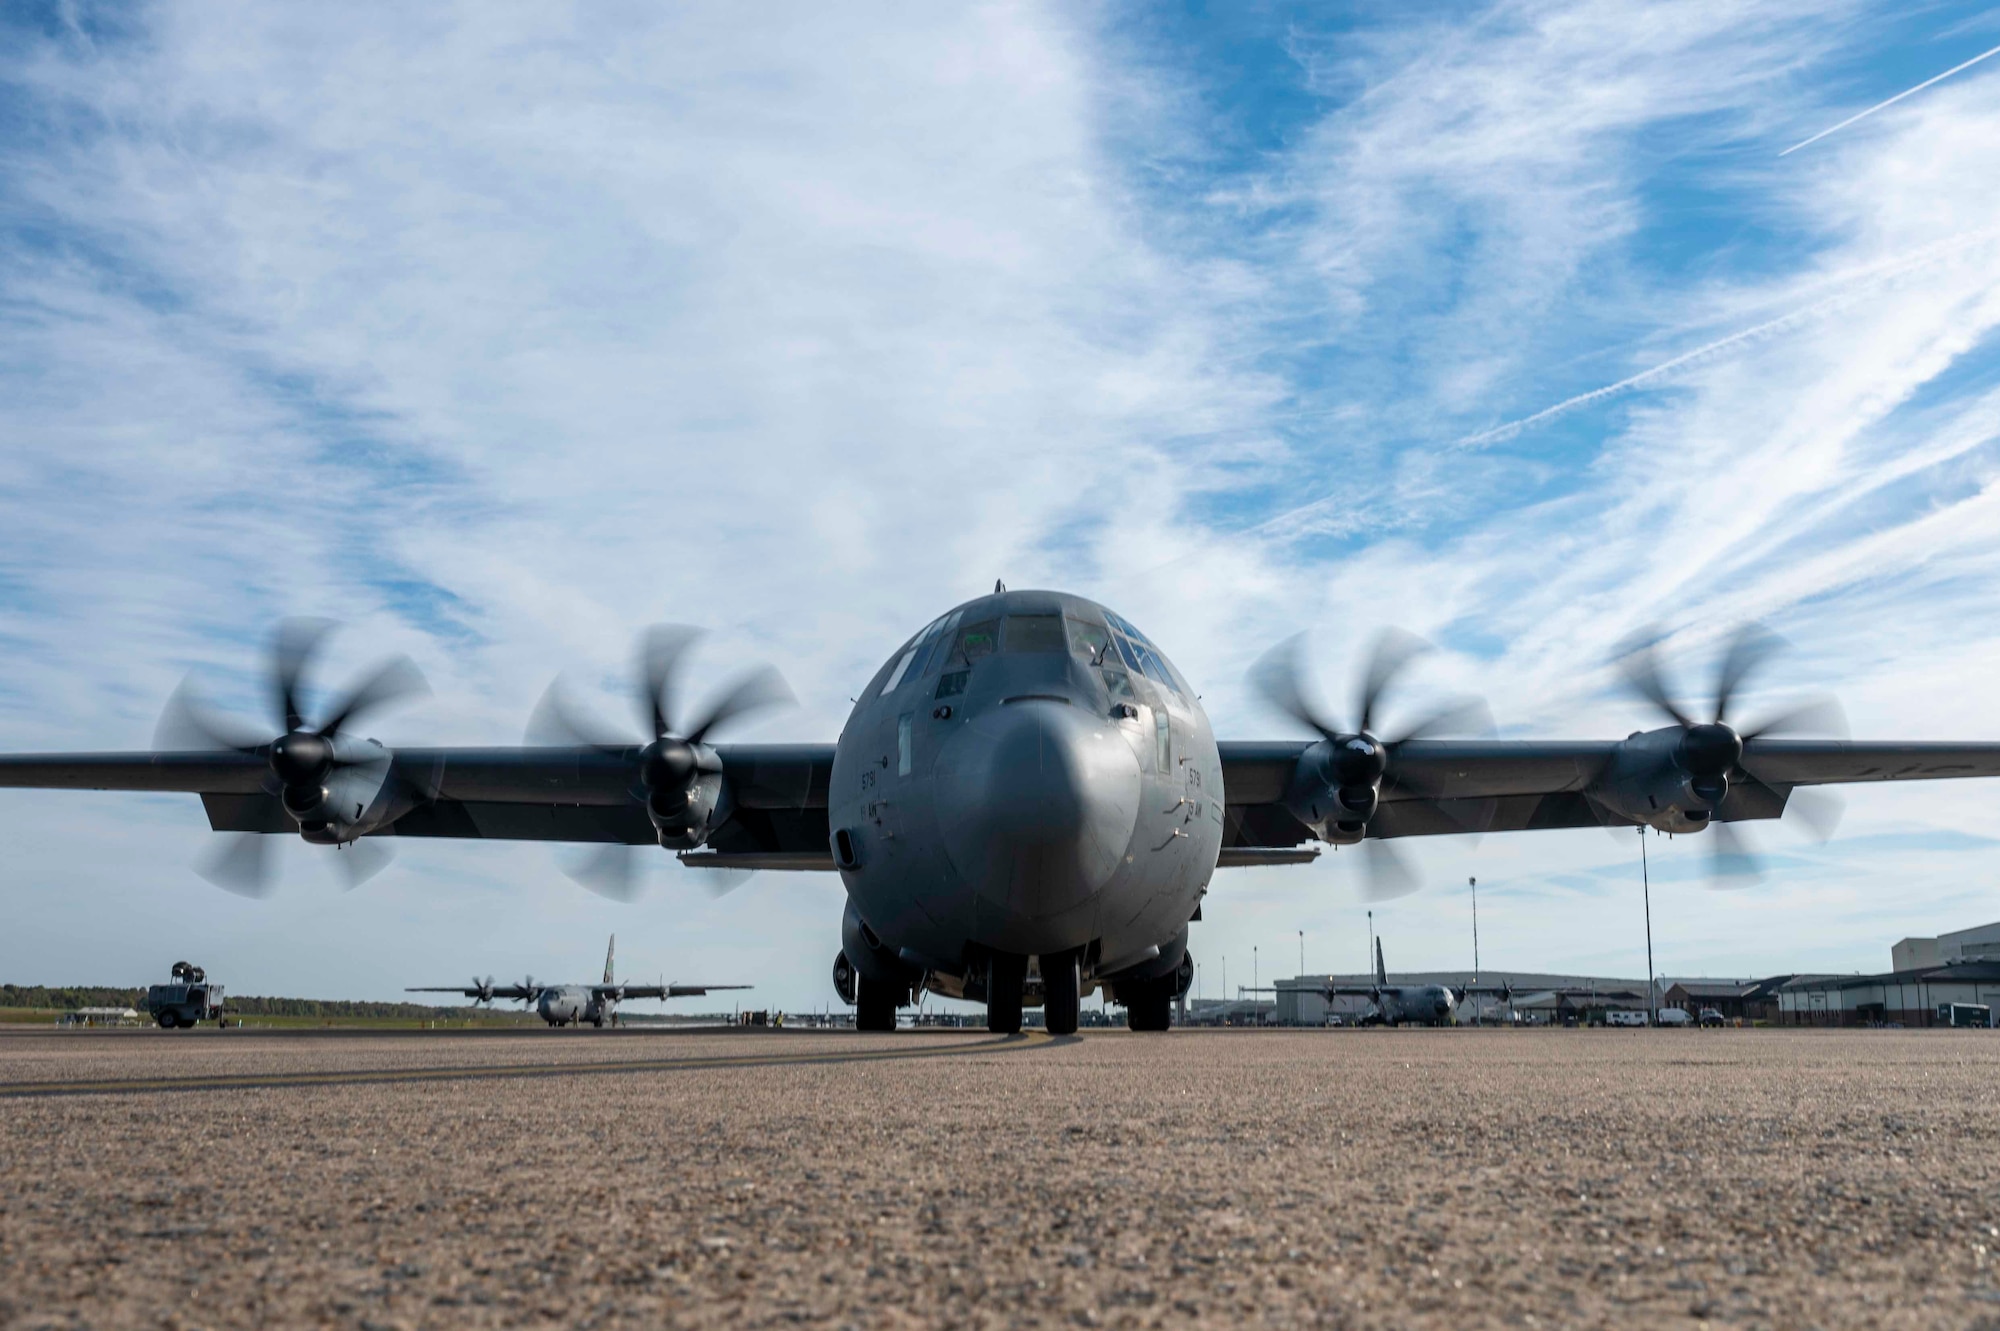 A C-130 is on the flightline before takeoff